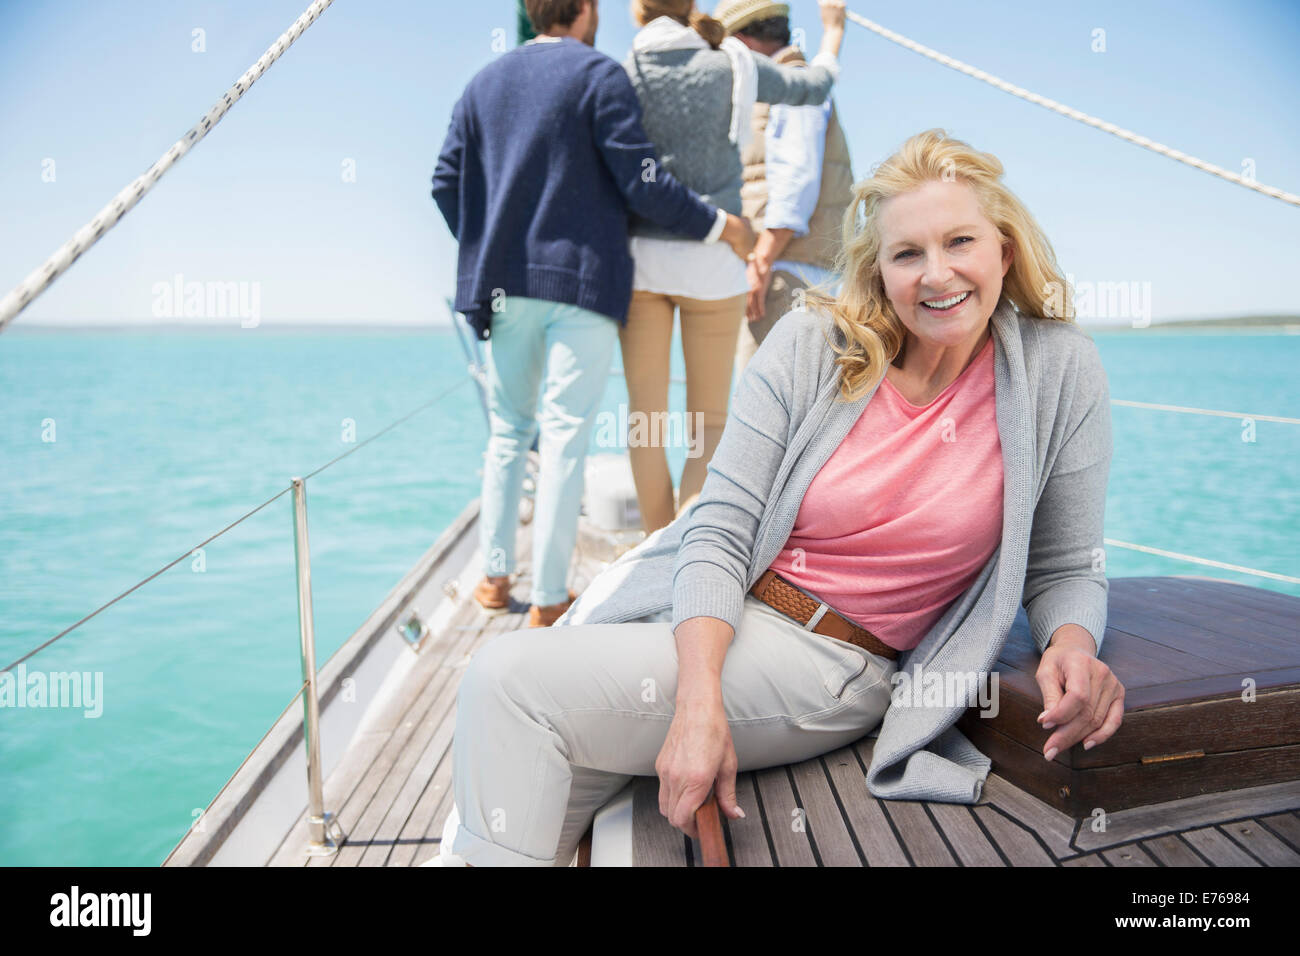 Older woman sitting on boat relaxing with family Stock Photo